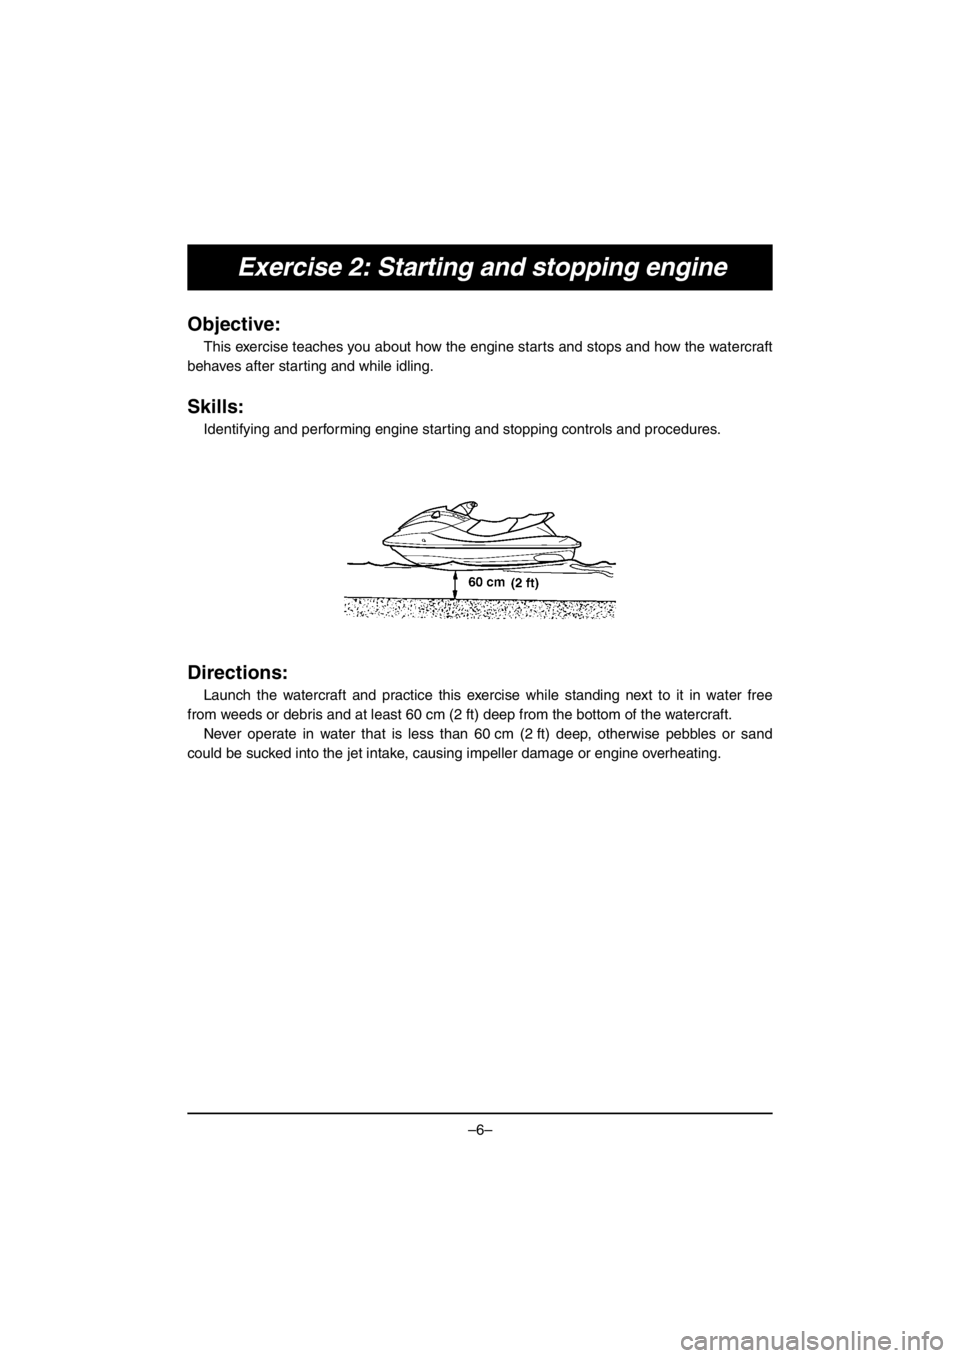 YAMAHA V1 SPORT 2016  Owners Manual –6–
Exercise 2: Starting and stopping engine
Objective:
This exercise teaches you about how the engine starts and stops and how the watercraft
behaves after starting and while idling.
Skills:
Iden